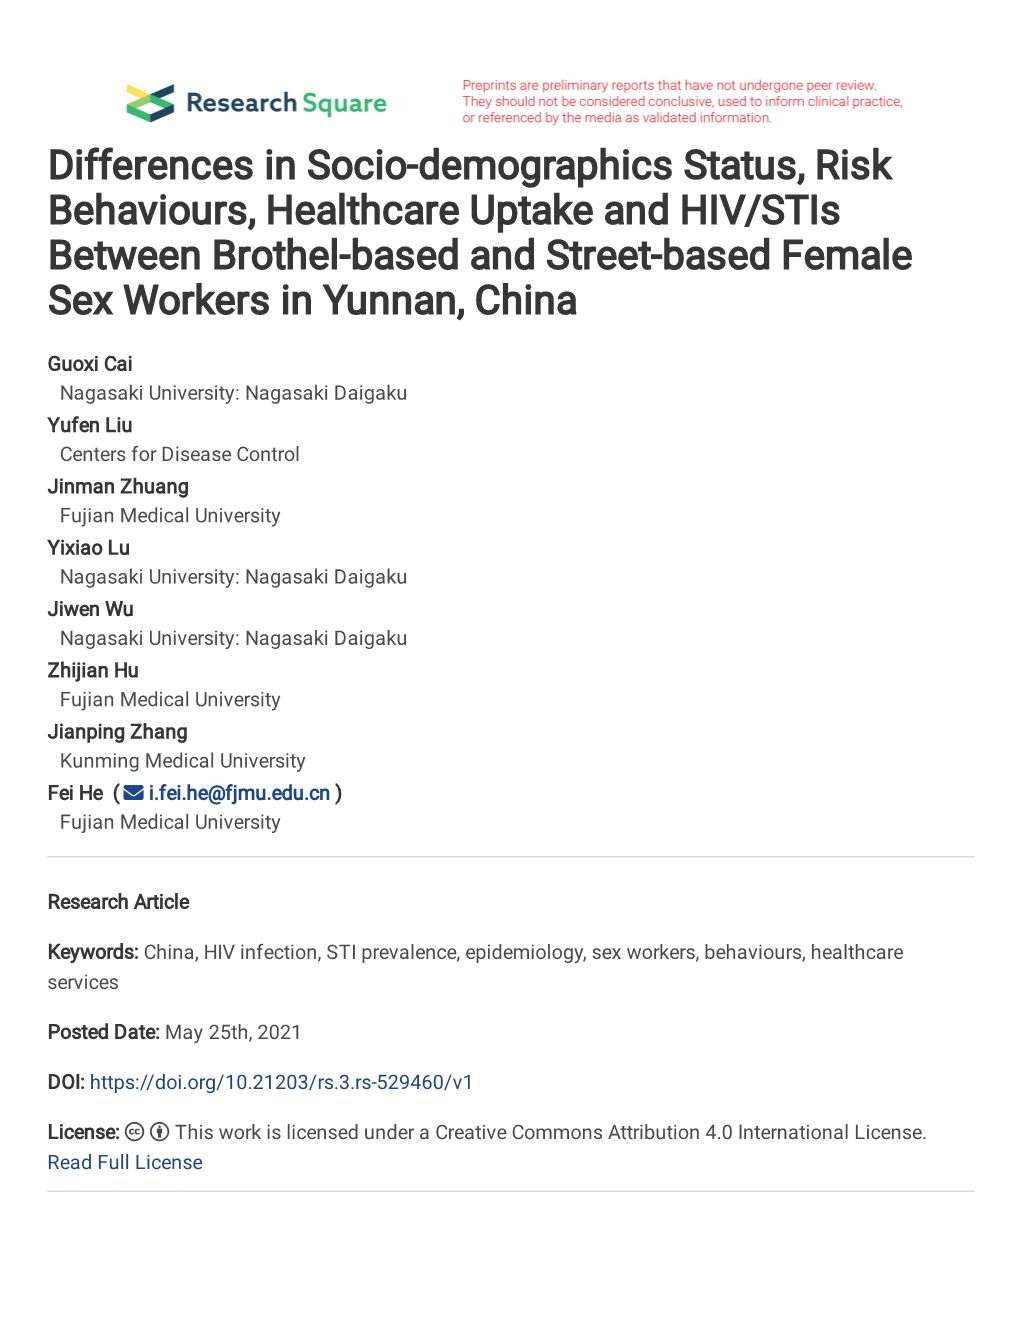 Differences in Socio-Demographics Status, Risk Behaviours, Healthcare Uptake and HIV/Stis Between Brothel-Based and Street-Based Female Sex Workers in Yunnan, China